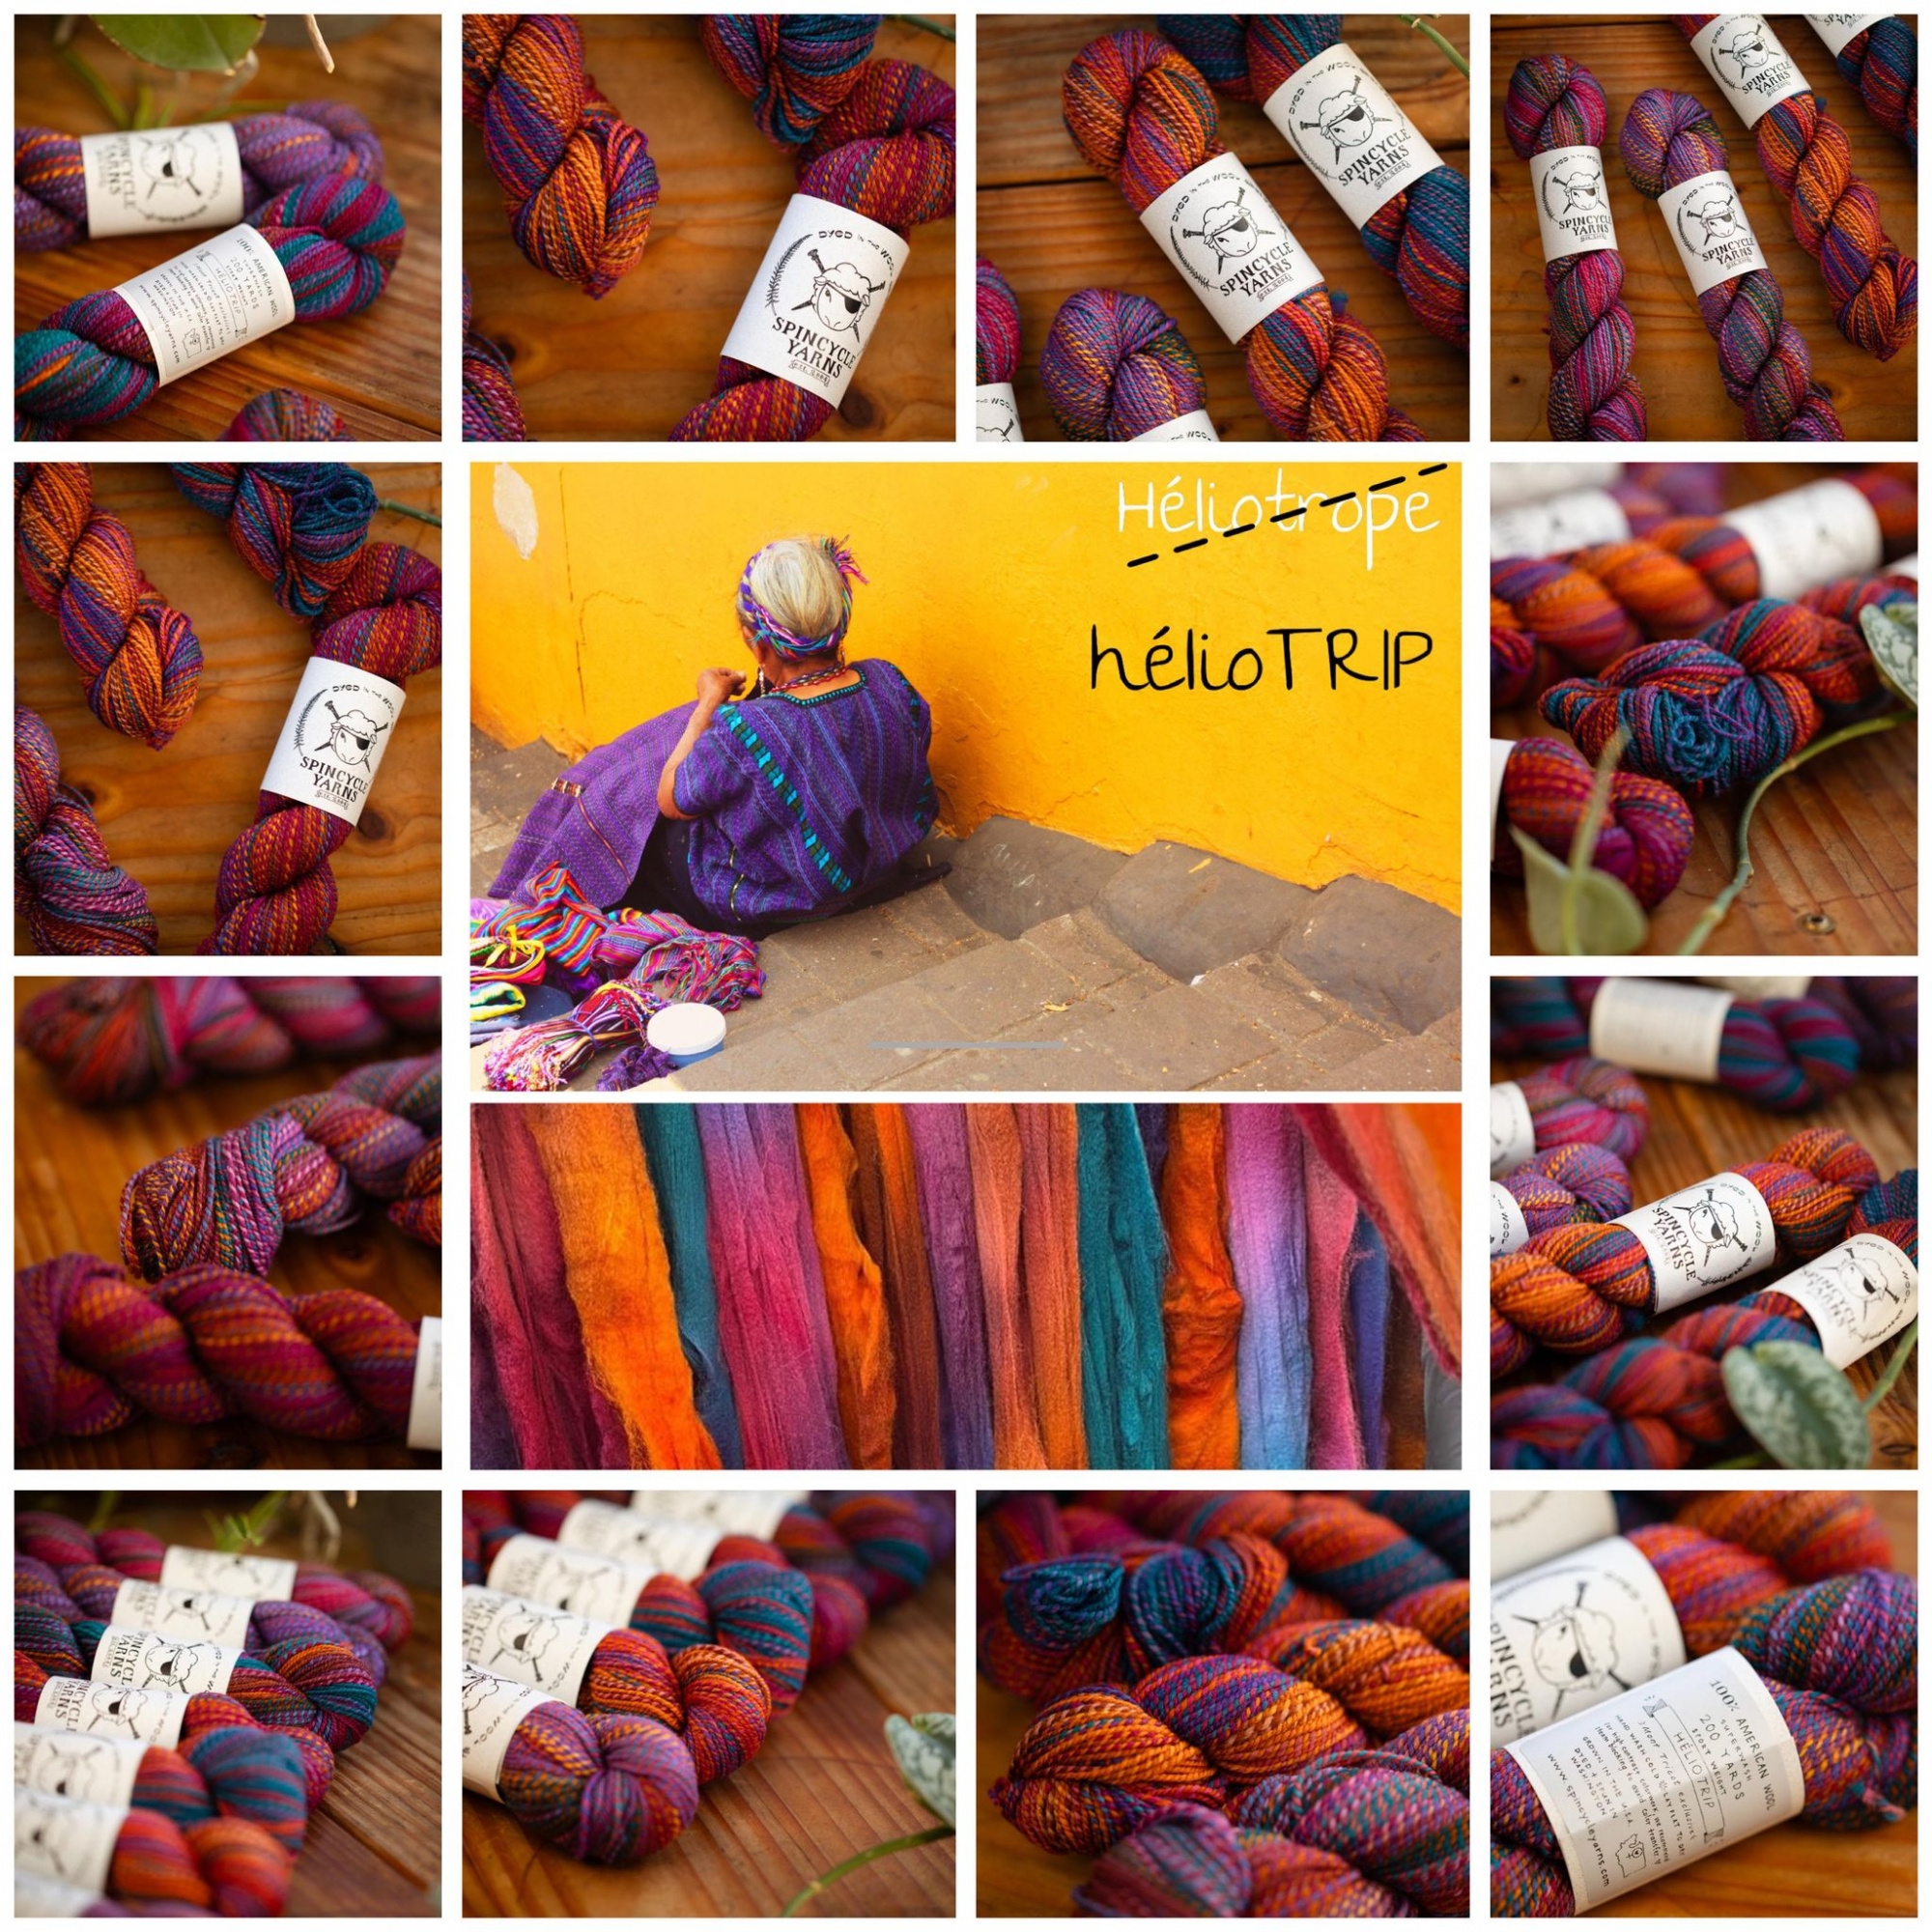 Spincycle Yarns Dyed in the Wool - Sweetwater - Art of Yarn